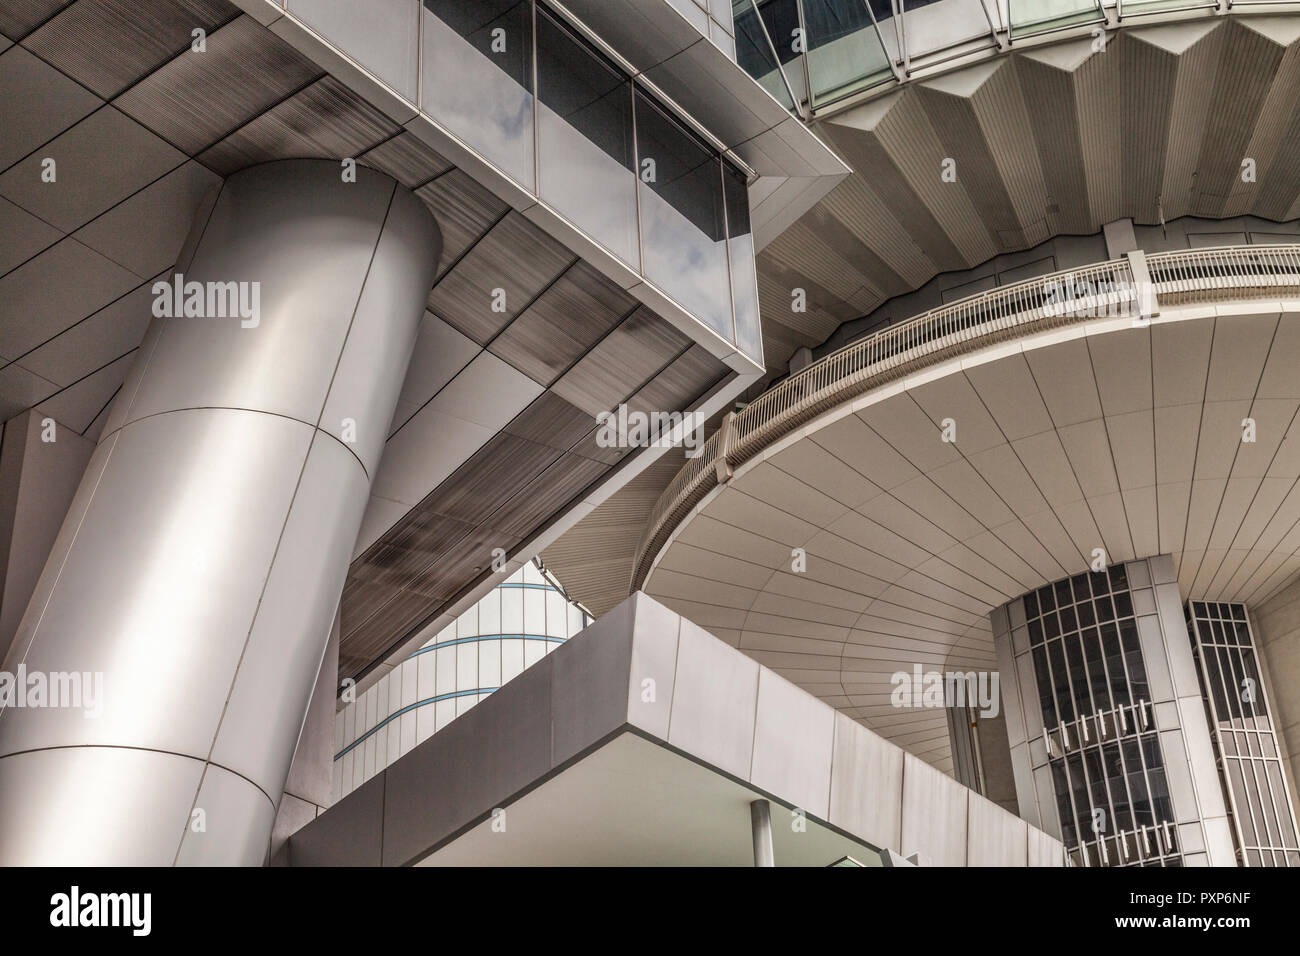 Singapore architecture abstract. The buildings are the OUE Tower and OUE Bayside building, on Colliers Quay. Stock Photo